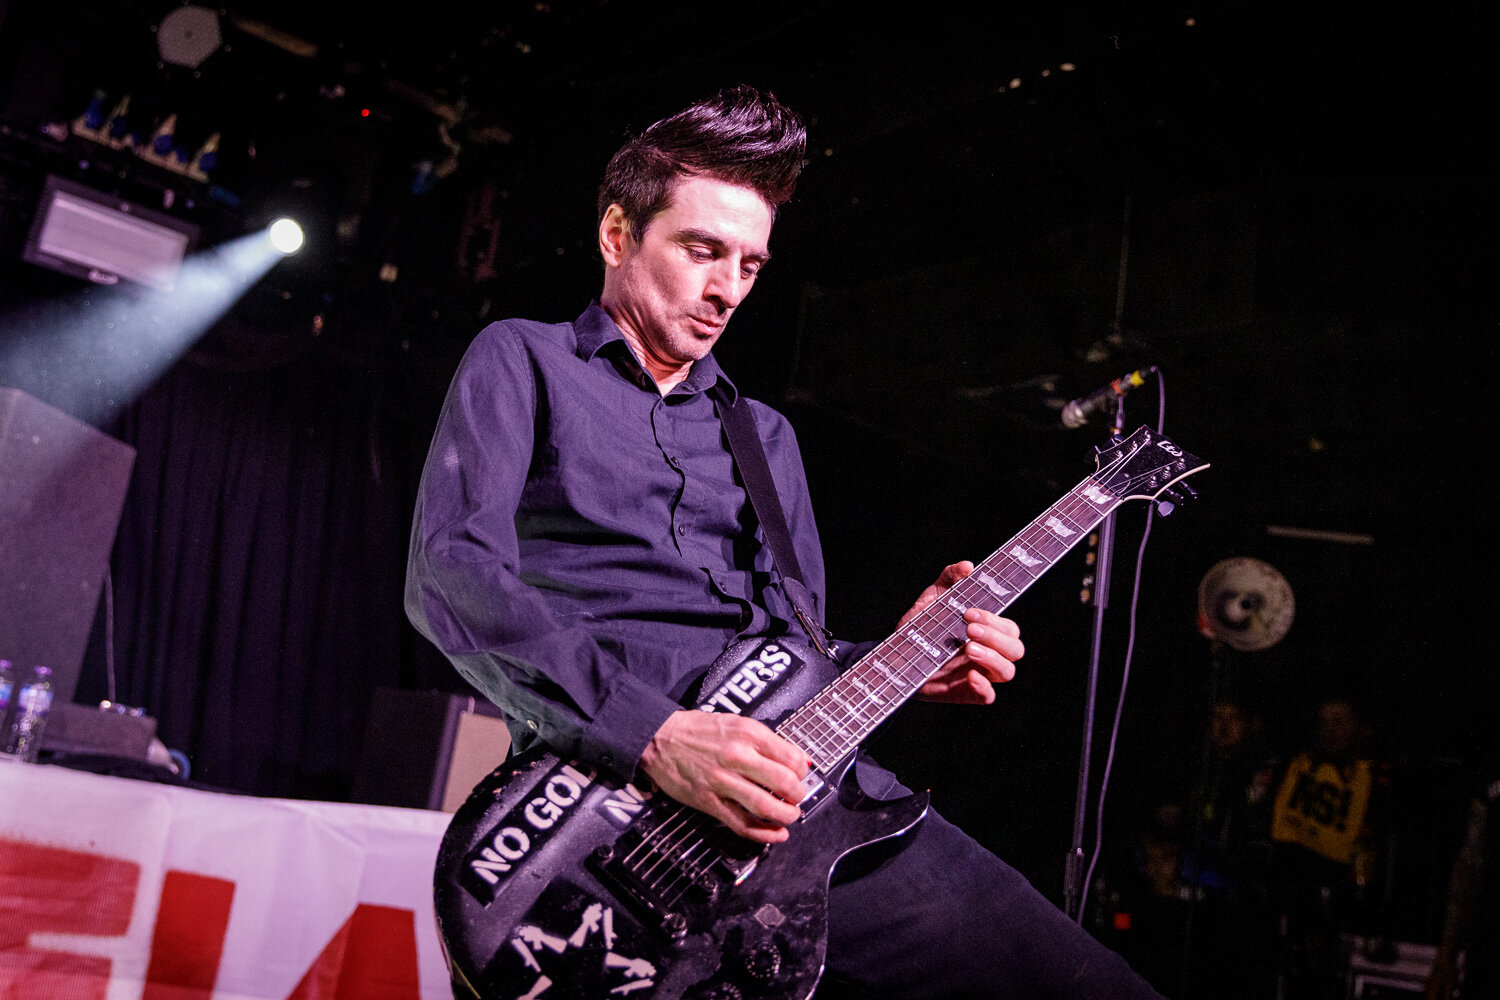 Anti-Flag at Academy Club in Manchester on February 5th 2020 